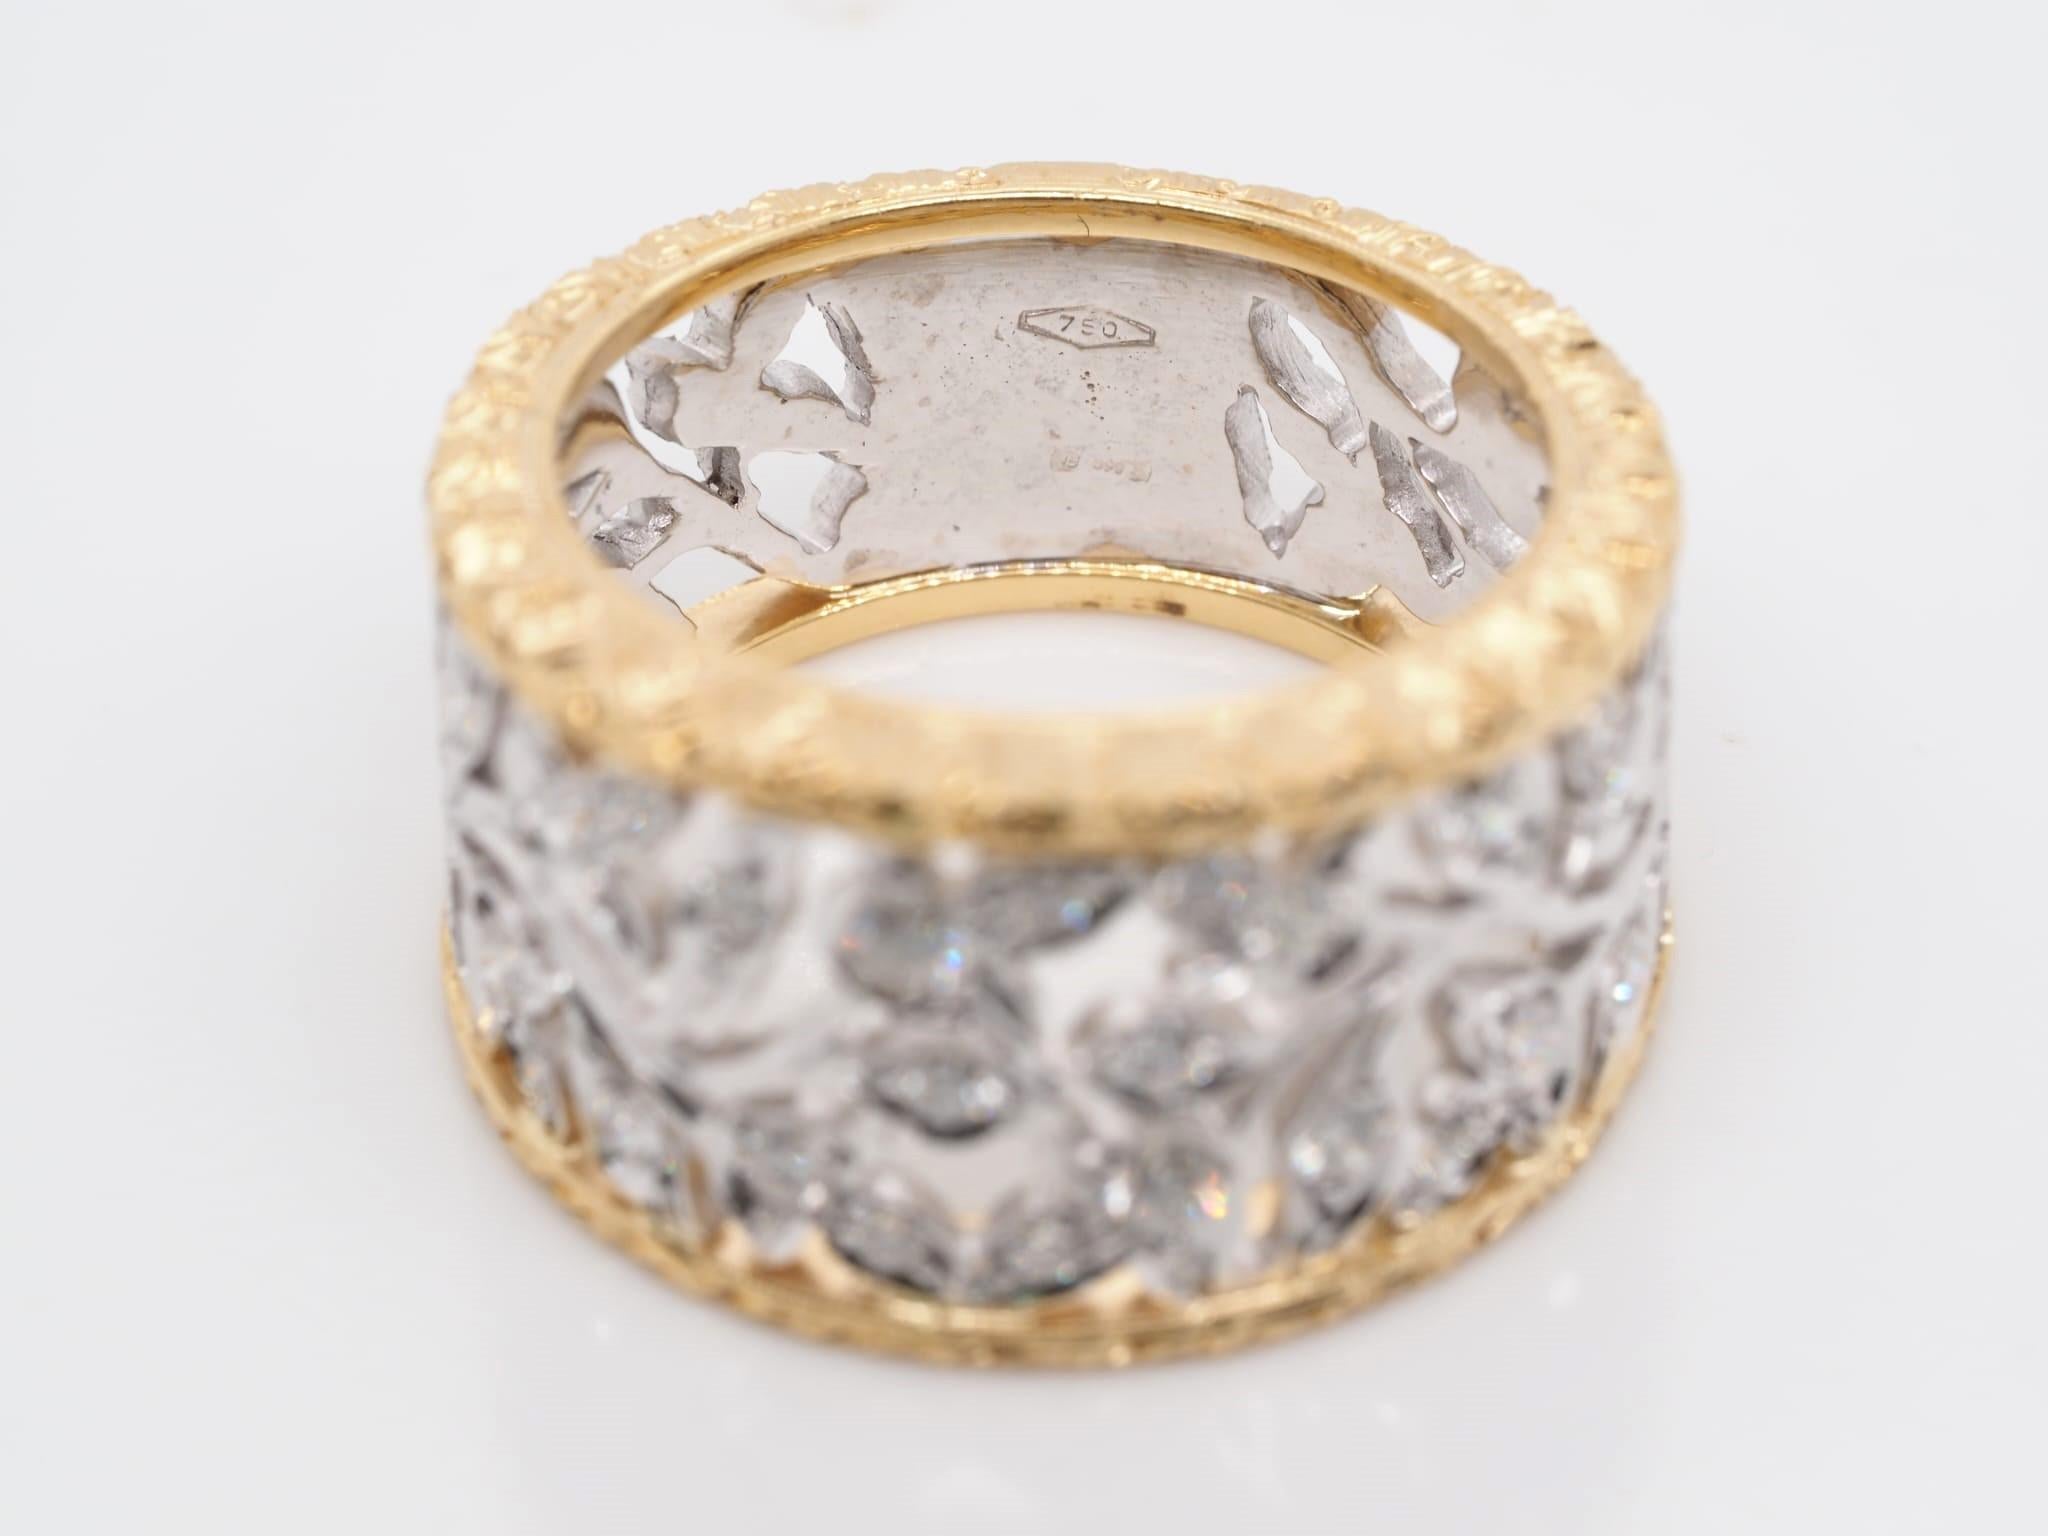 Vintage 18K Yellow & White Gold 0.60 ct Round Cut Diamond Band Ring In Good Condition For Sale In Addison, TX